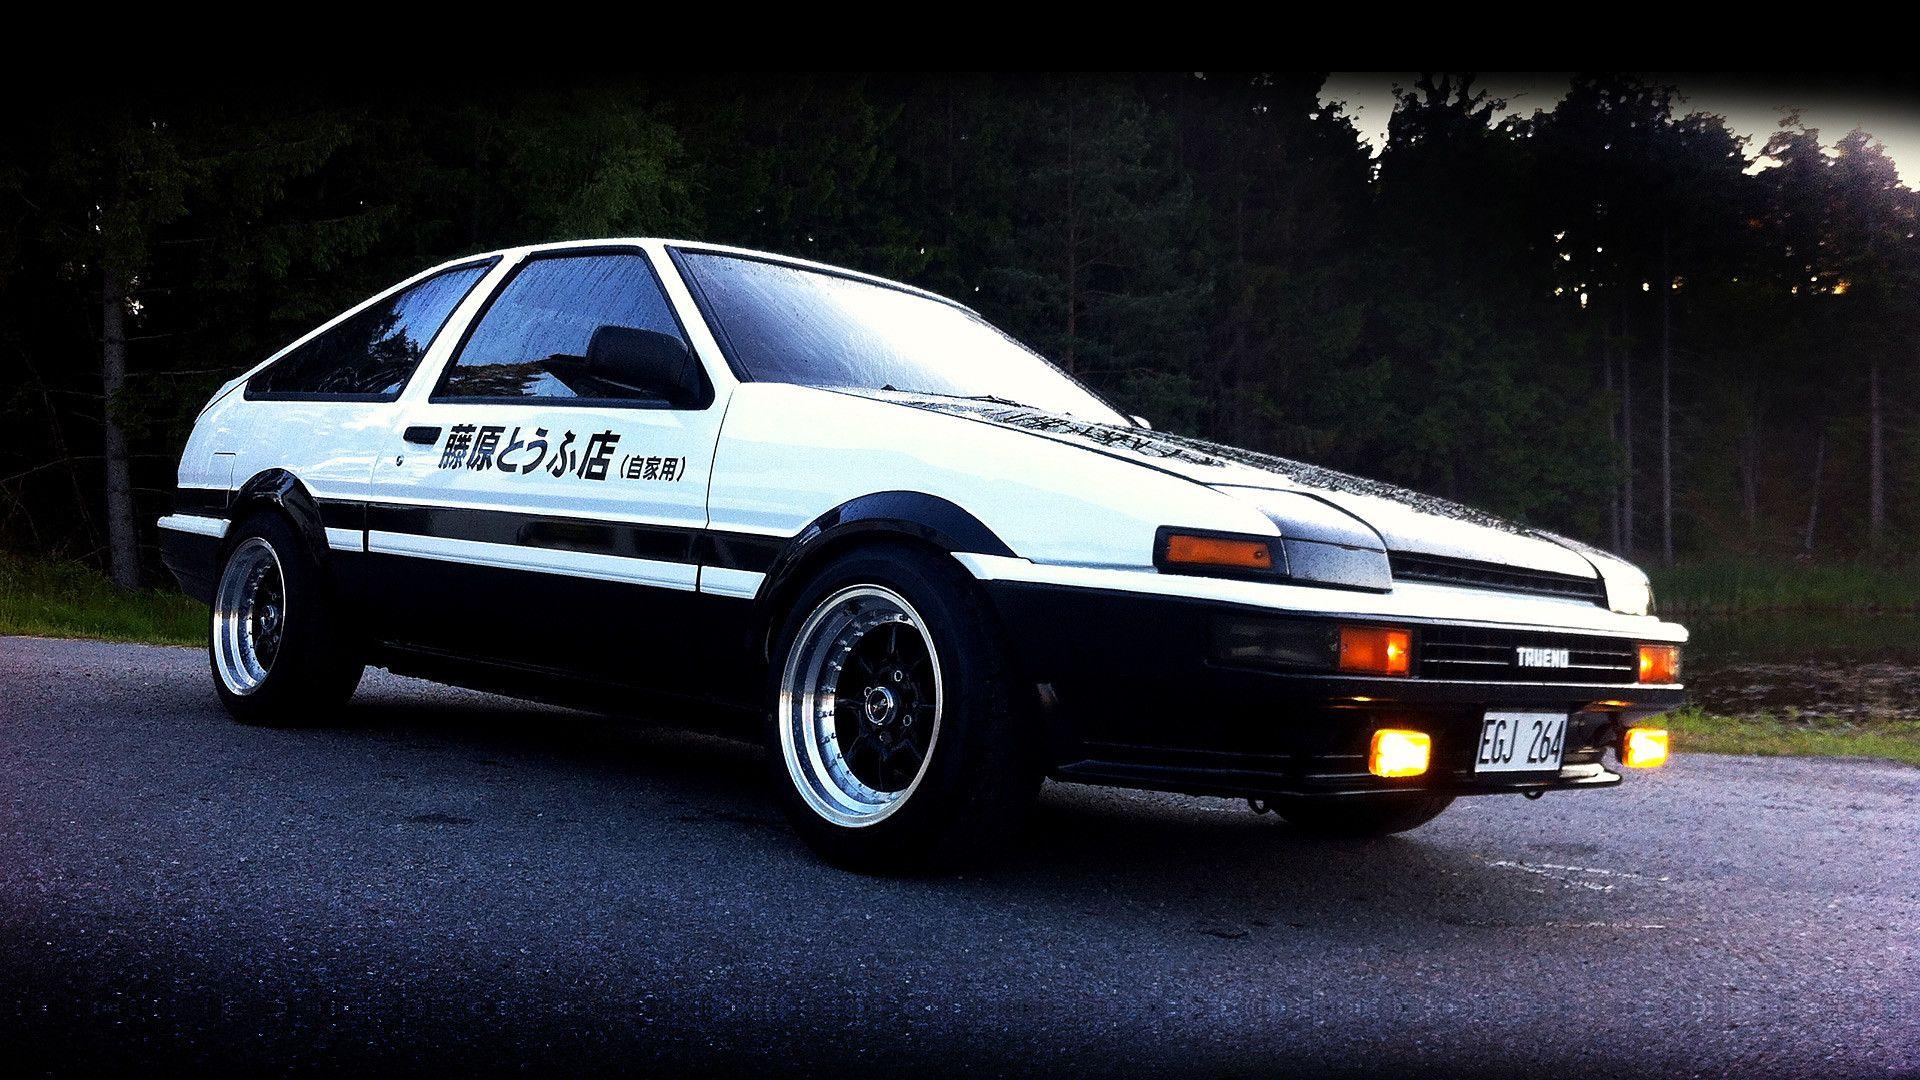 Toyota Ae86 Wallpapers Top Free Toyota Ae86 Backgrounds Wallpaperaccess